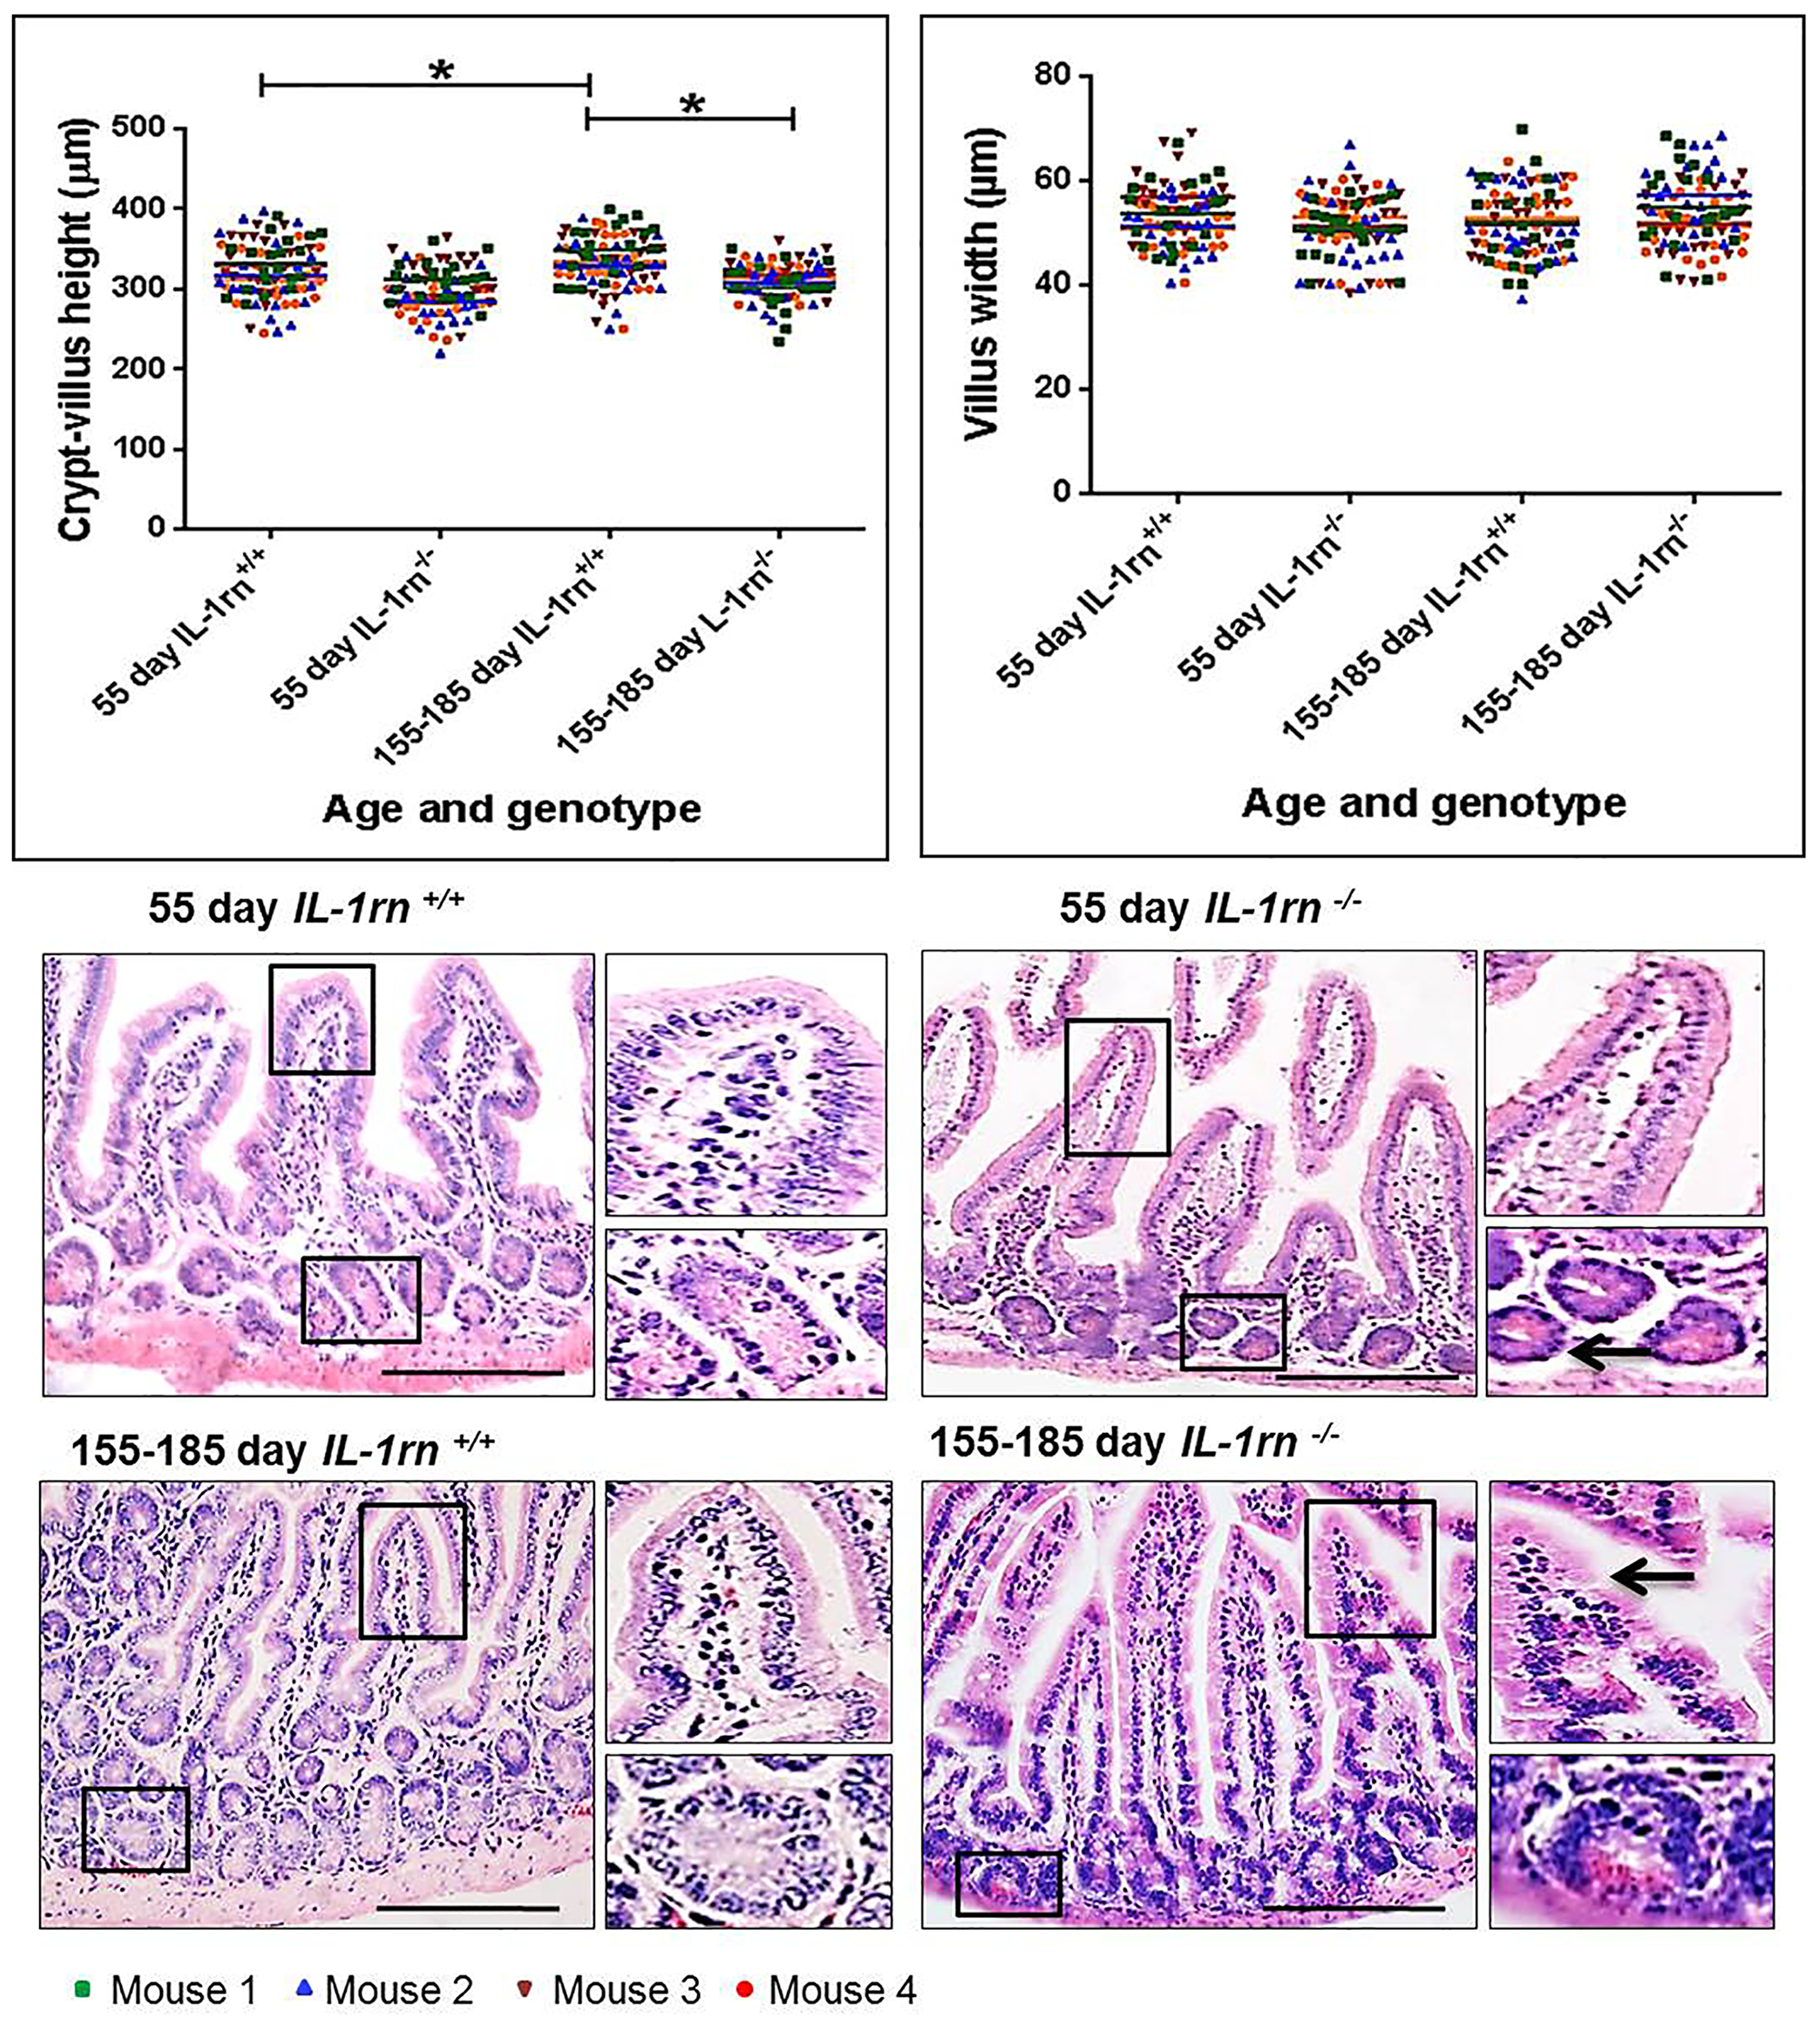 Histological analysis and morphology of the intact well-oriented crypt-villus axis heights and villus widths of Jejunum in the 55 day old IL-1rn-/- mice and 155-185 day old IL-1rn-/- mice compared to age-matched wild-type mice.